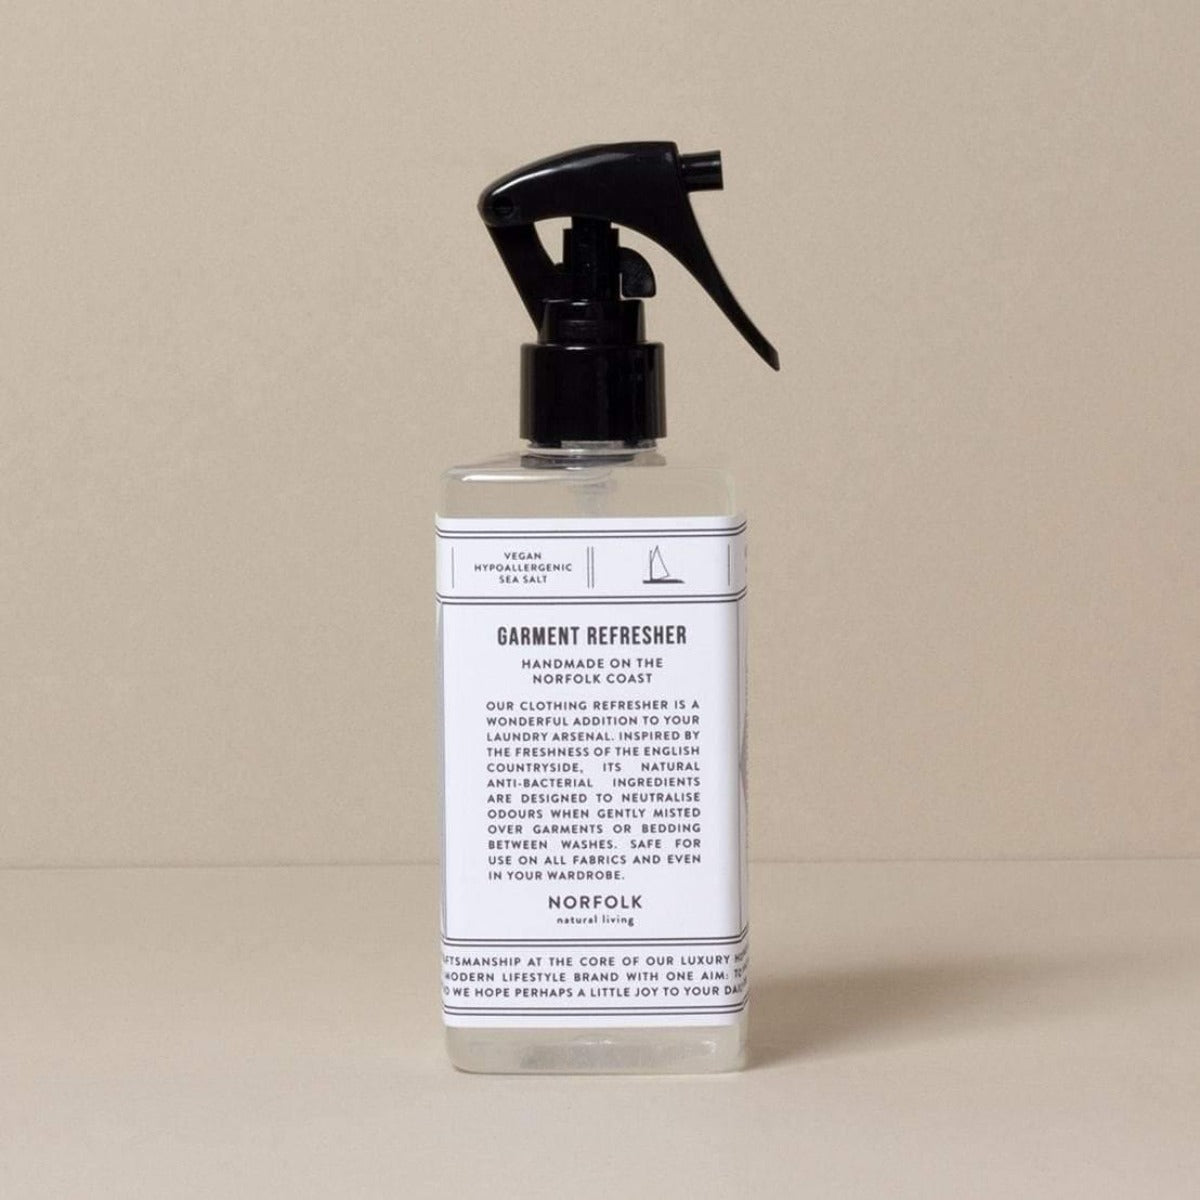 Garment and linen refresher spray to re-odorize and freshen clothes, sheets, drawers and wardrobes, with a scent inspired by the English coastal countryside.